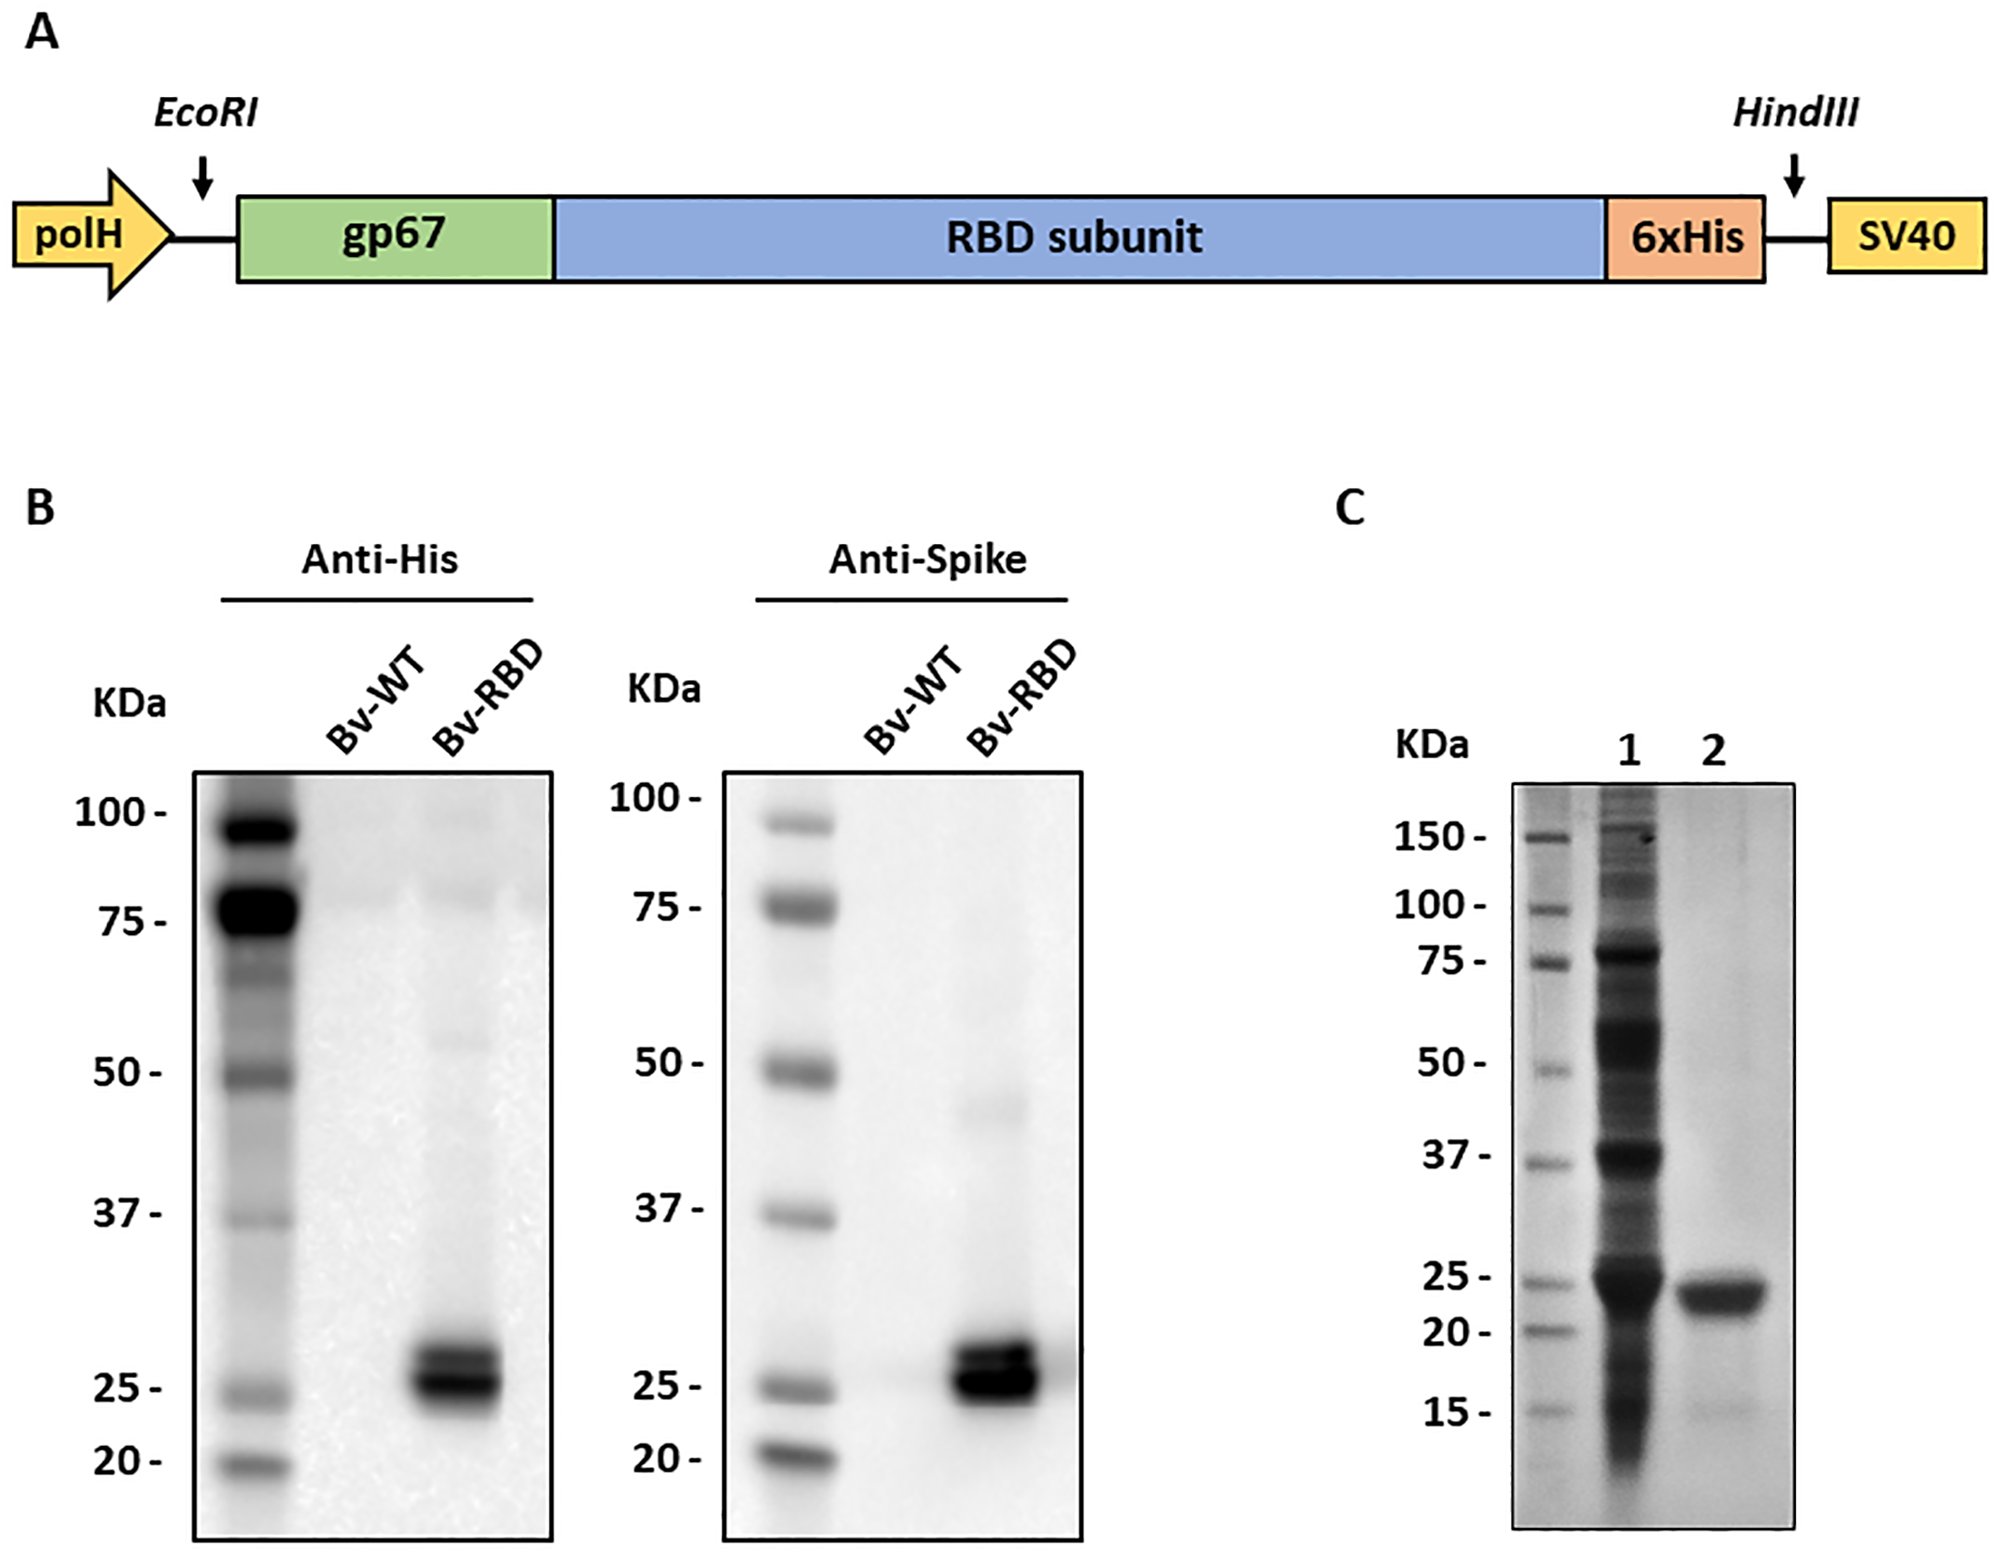 Squalene in oil-based adjuvant improves the immunogenicity of SARS-CoV-2 RBD and confirms safety in animal models